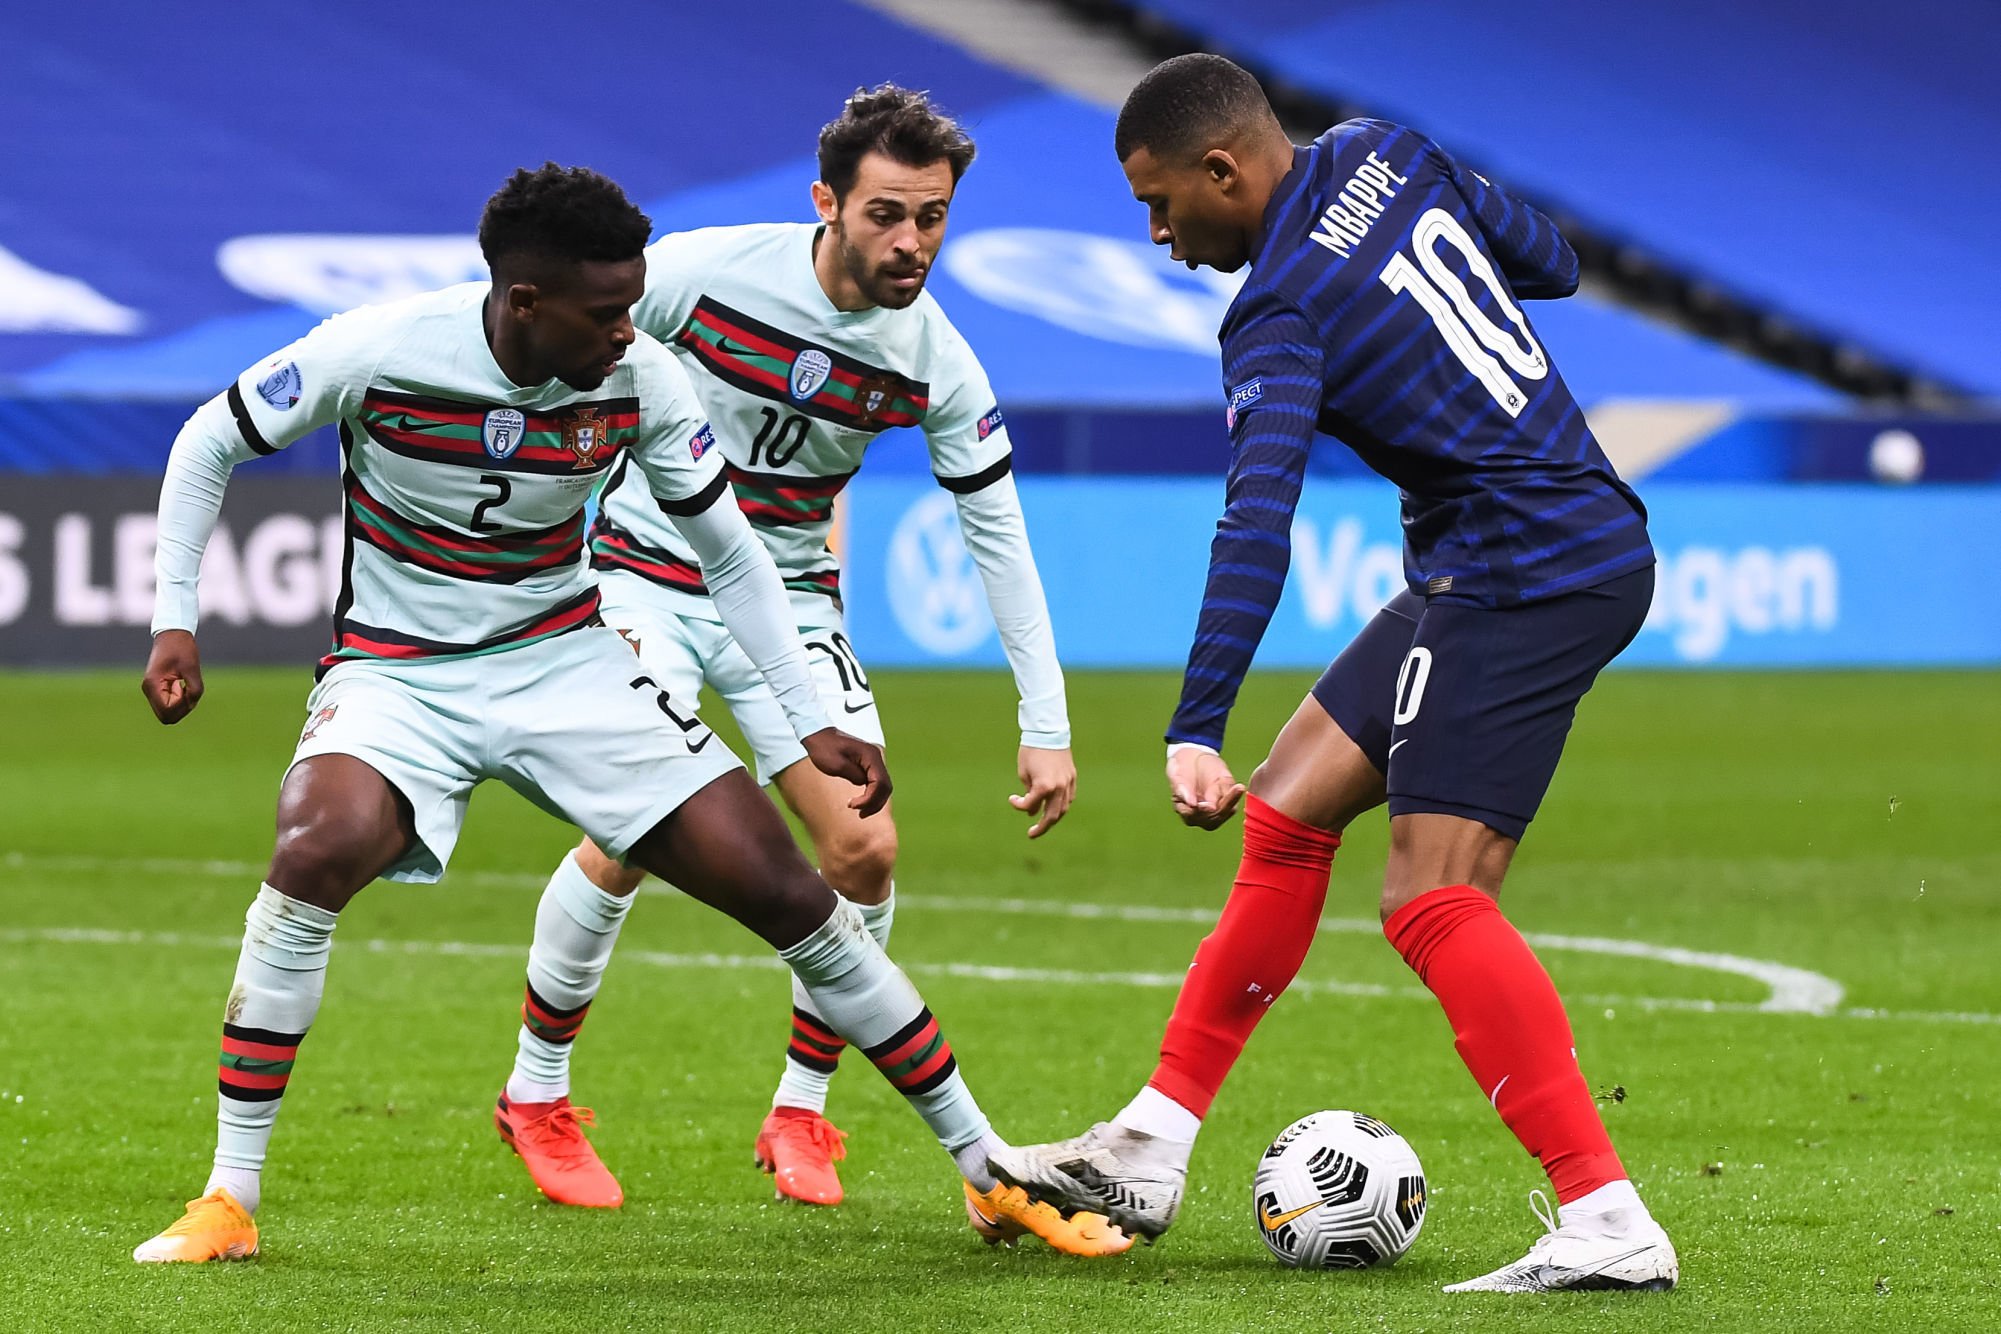 Nelson SEMEDO of Portugal, Bernardo SILVA of Portugal and Kylian MBAPPE of France during the Nations League - Group 3 match between France and Portugal on October 11, 2020 in Paris, France. (Photo by Baptiste Fernandez/Icon Sport) - Kylian MBAPPE - Bernardo SILVA - Nelson SEMEDO - Stade de France - Paris (France)